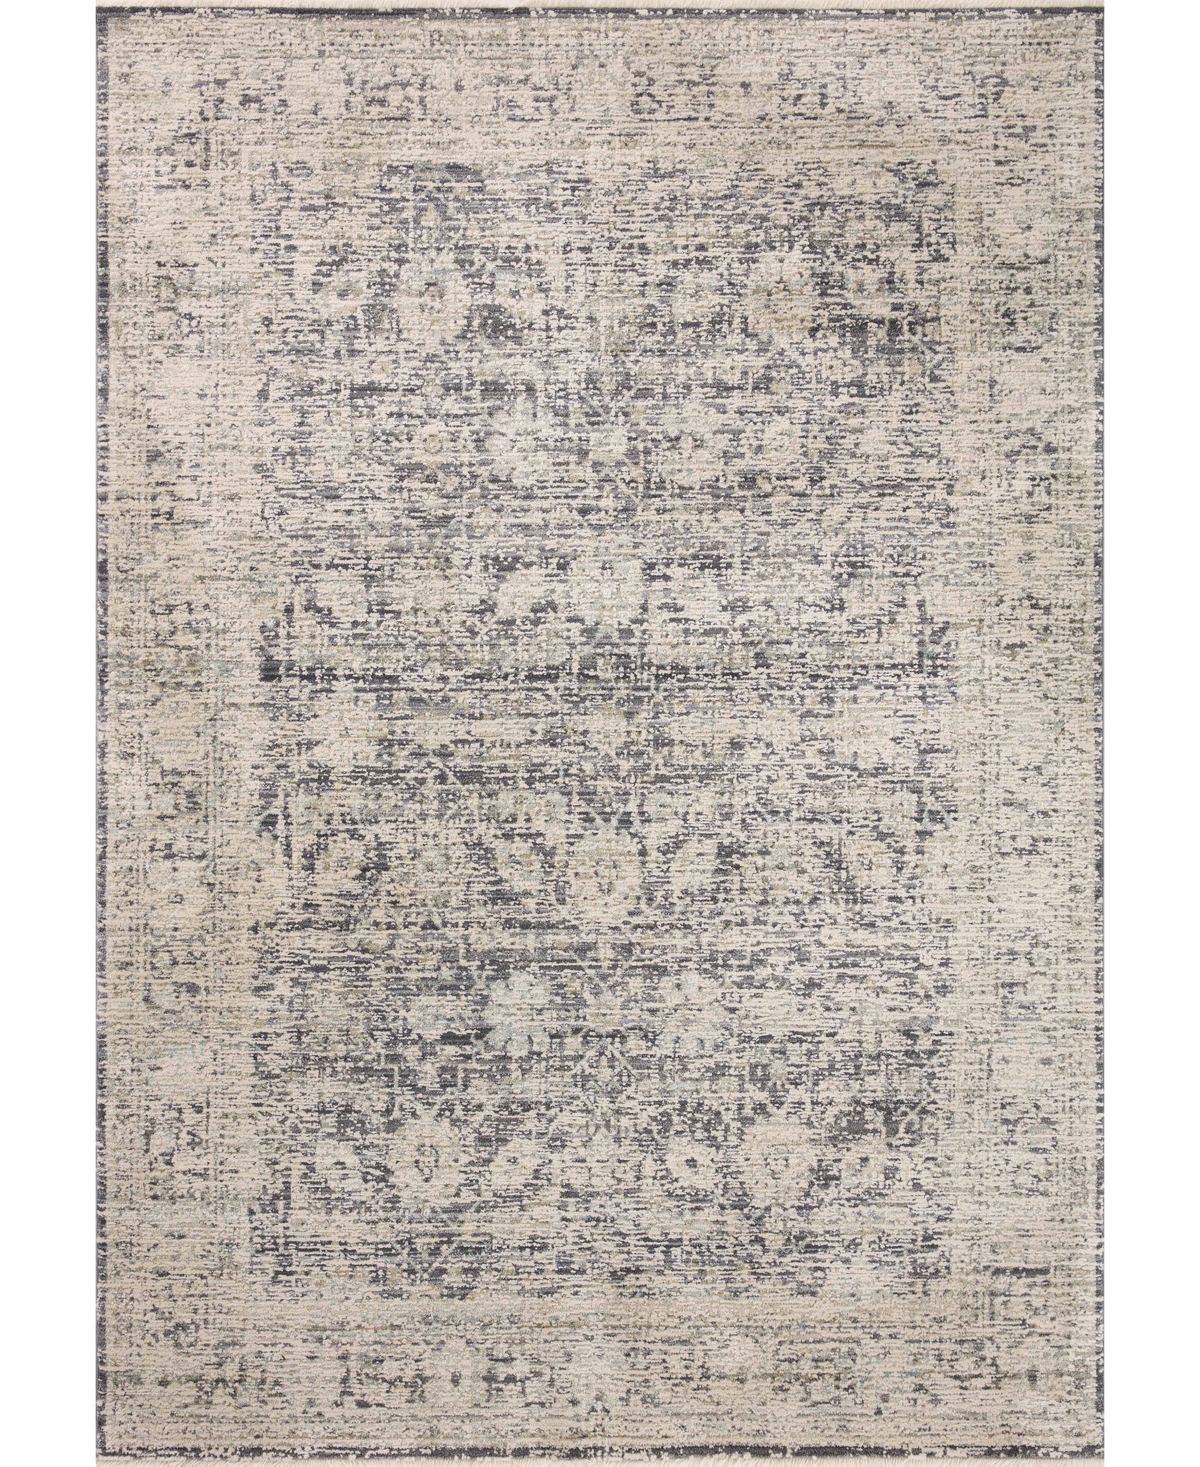 Amber Lewis X Loloi Alie Ale-05 7'10" X 10' Area Rug In Charcoal